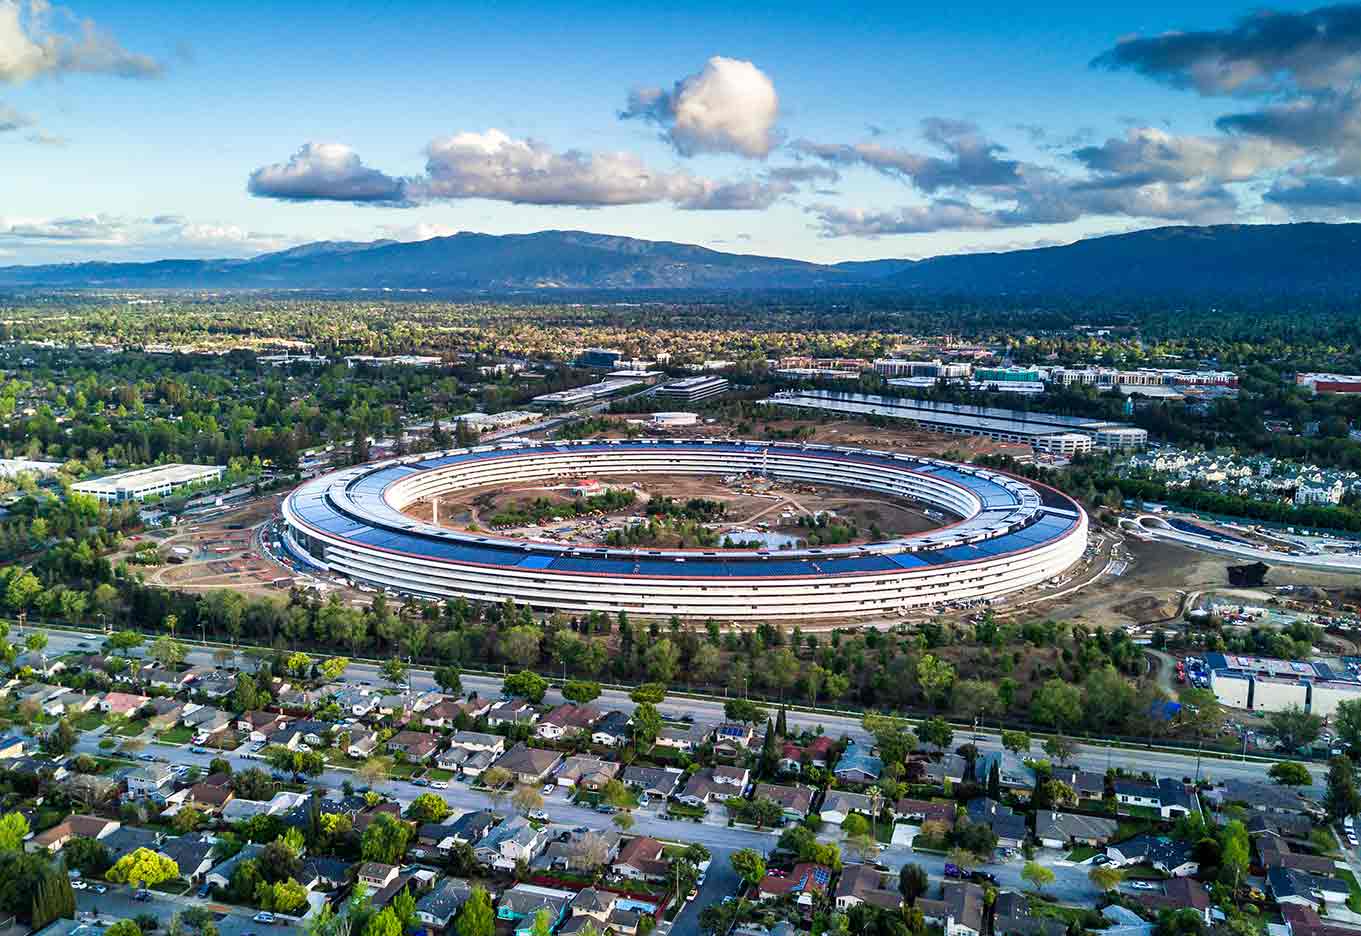 Apple Park depicted among the homes in Silicon Valley via UEES